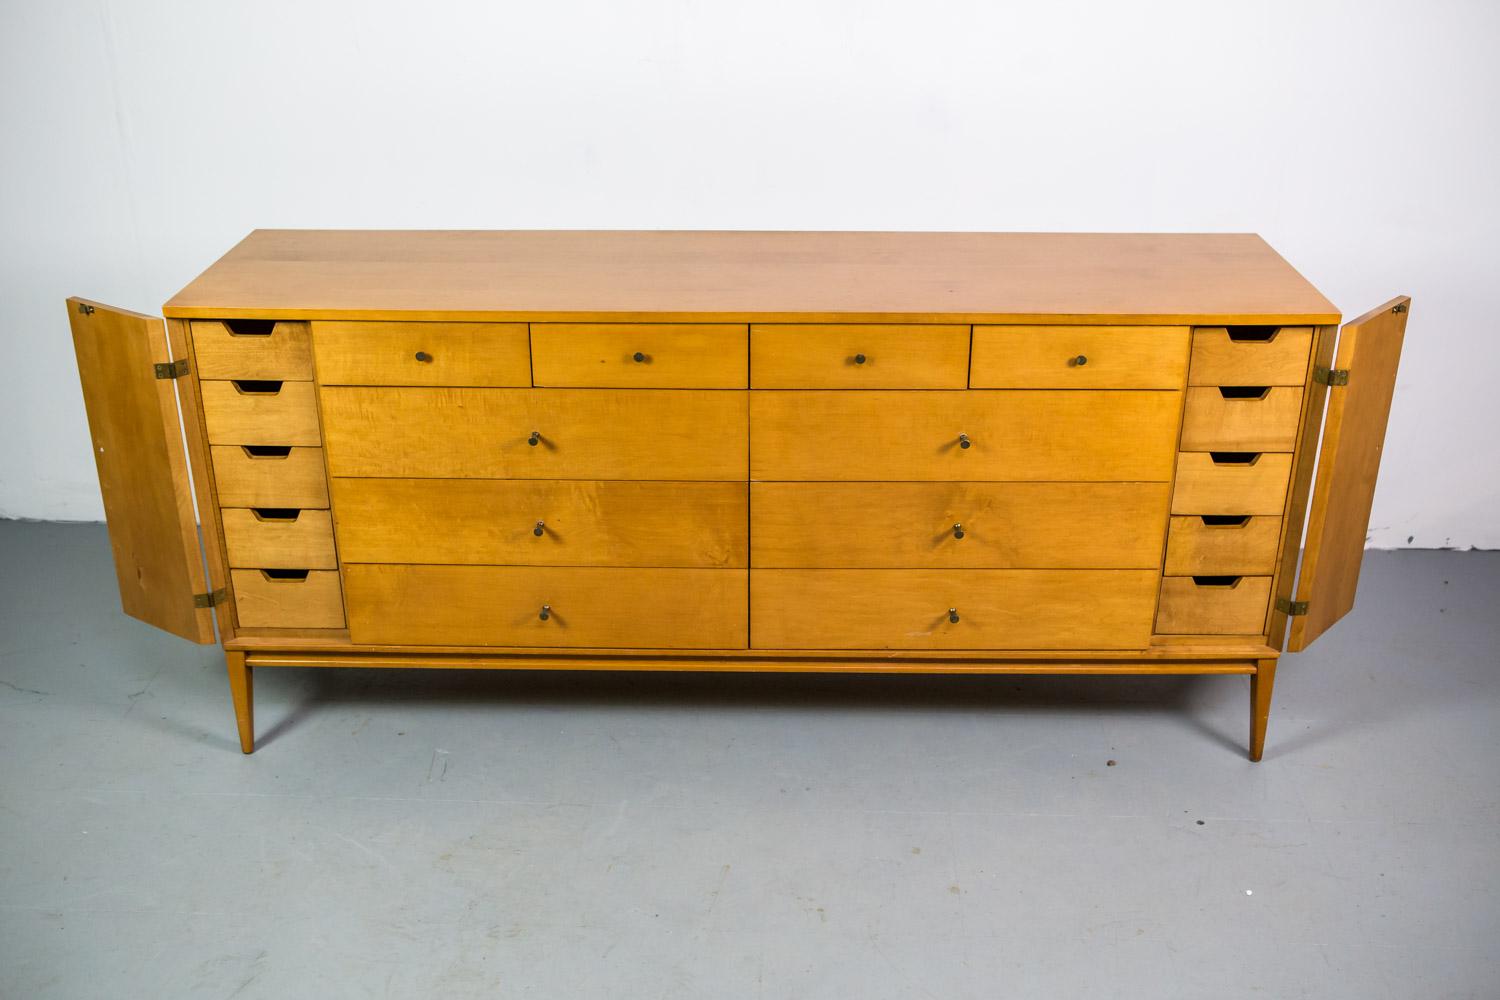 Planner Group for Winchendon Furniture. Designed and produced in the mid-1950s. Symmetrical drawer structure with four over six in center and another five drawers behind each door. All original hardware.